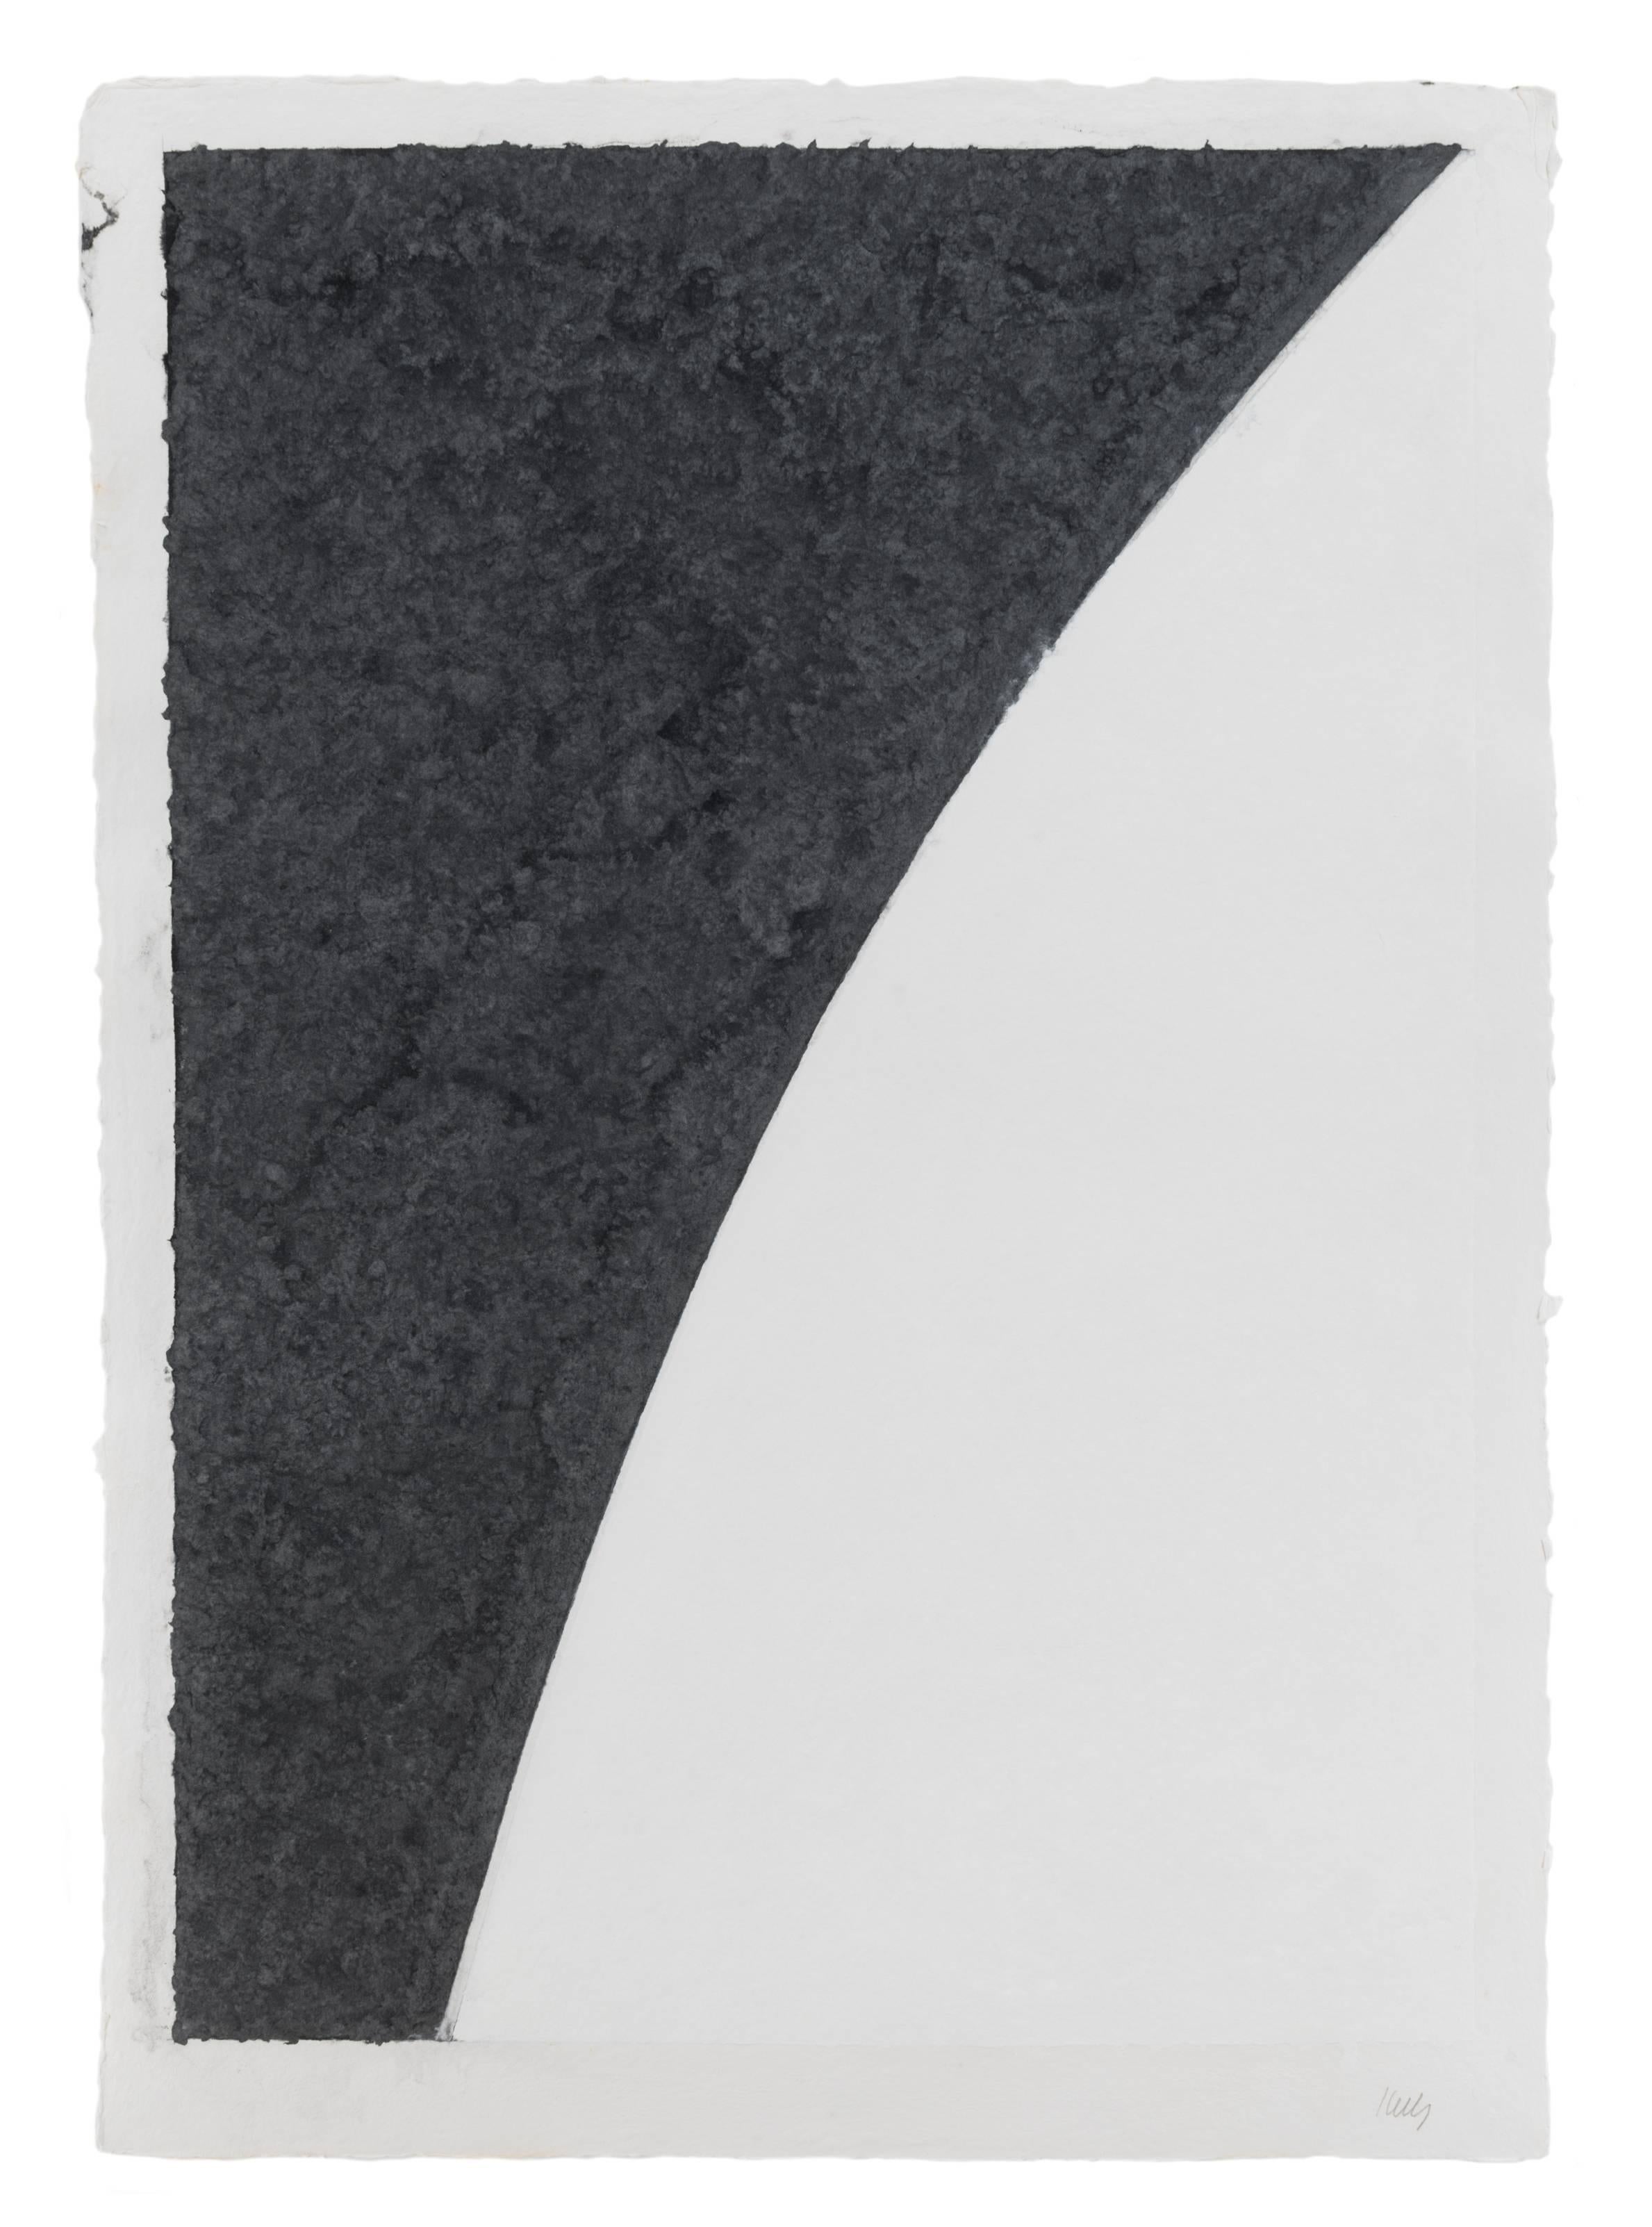 Ellsworth Kelly Abstract Print - Colored Paper Image I (White Curve with Black I)